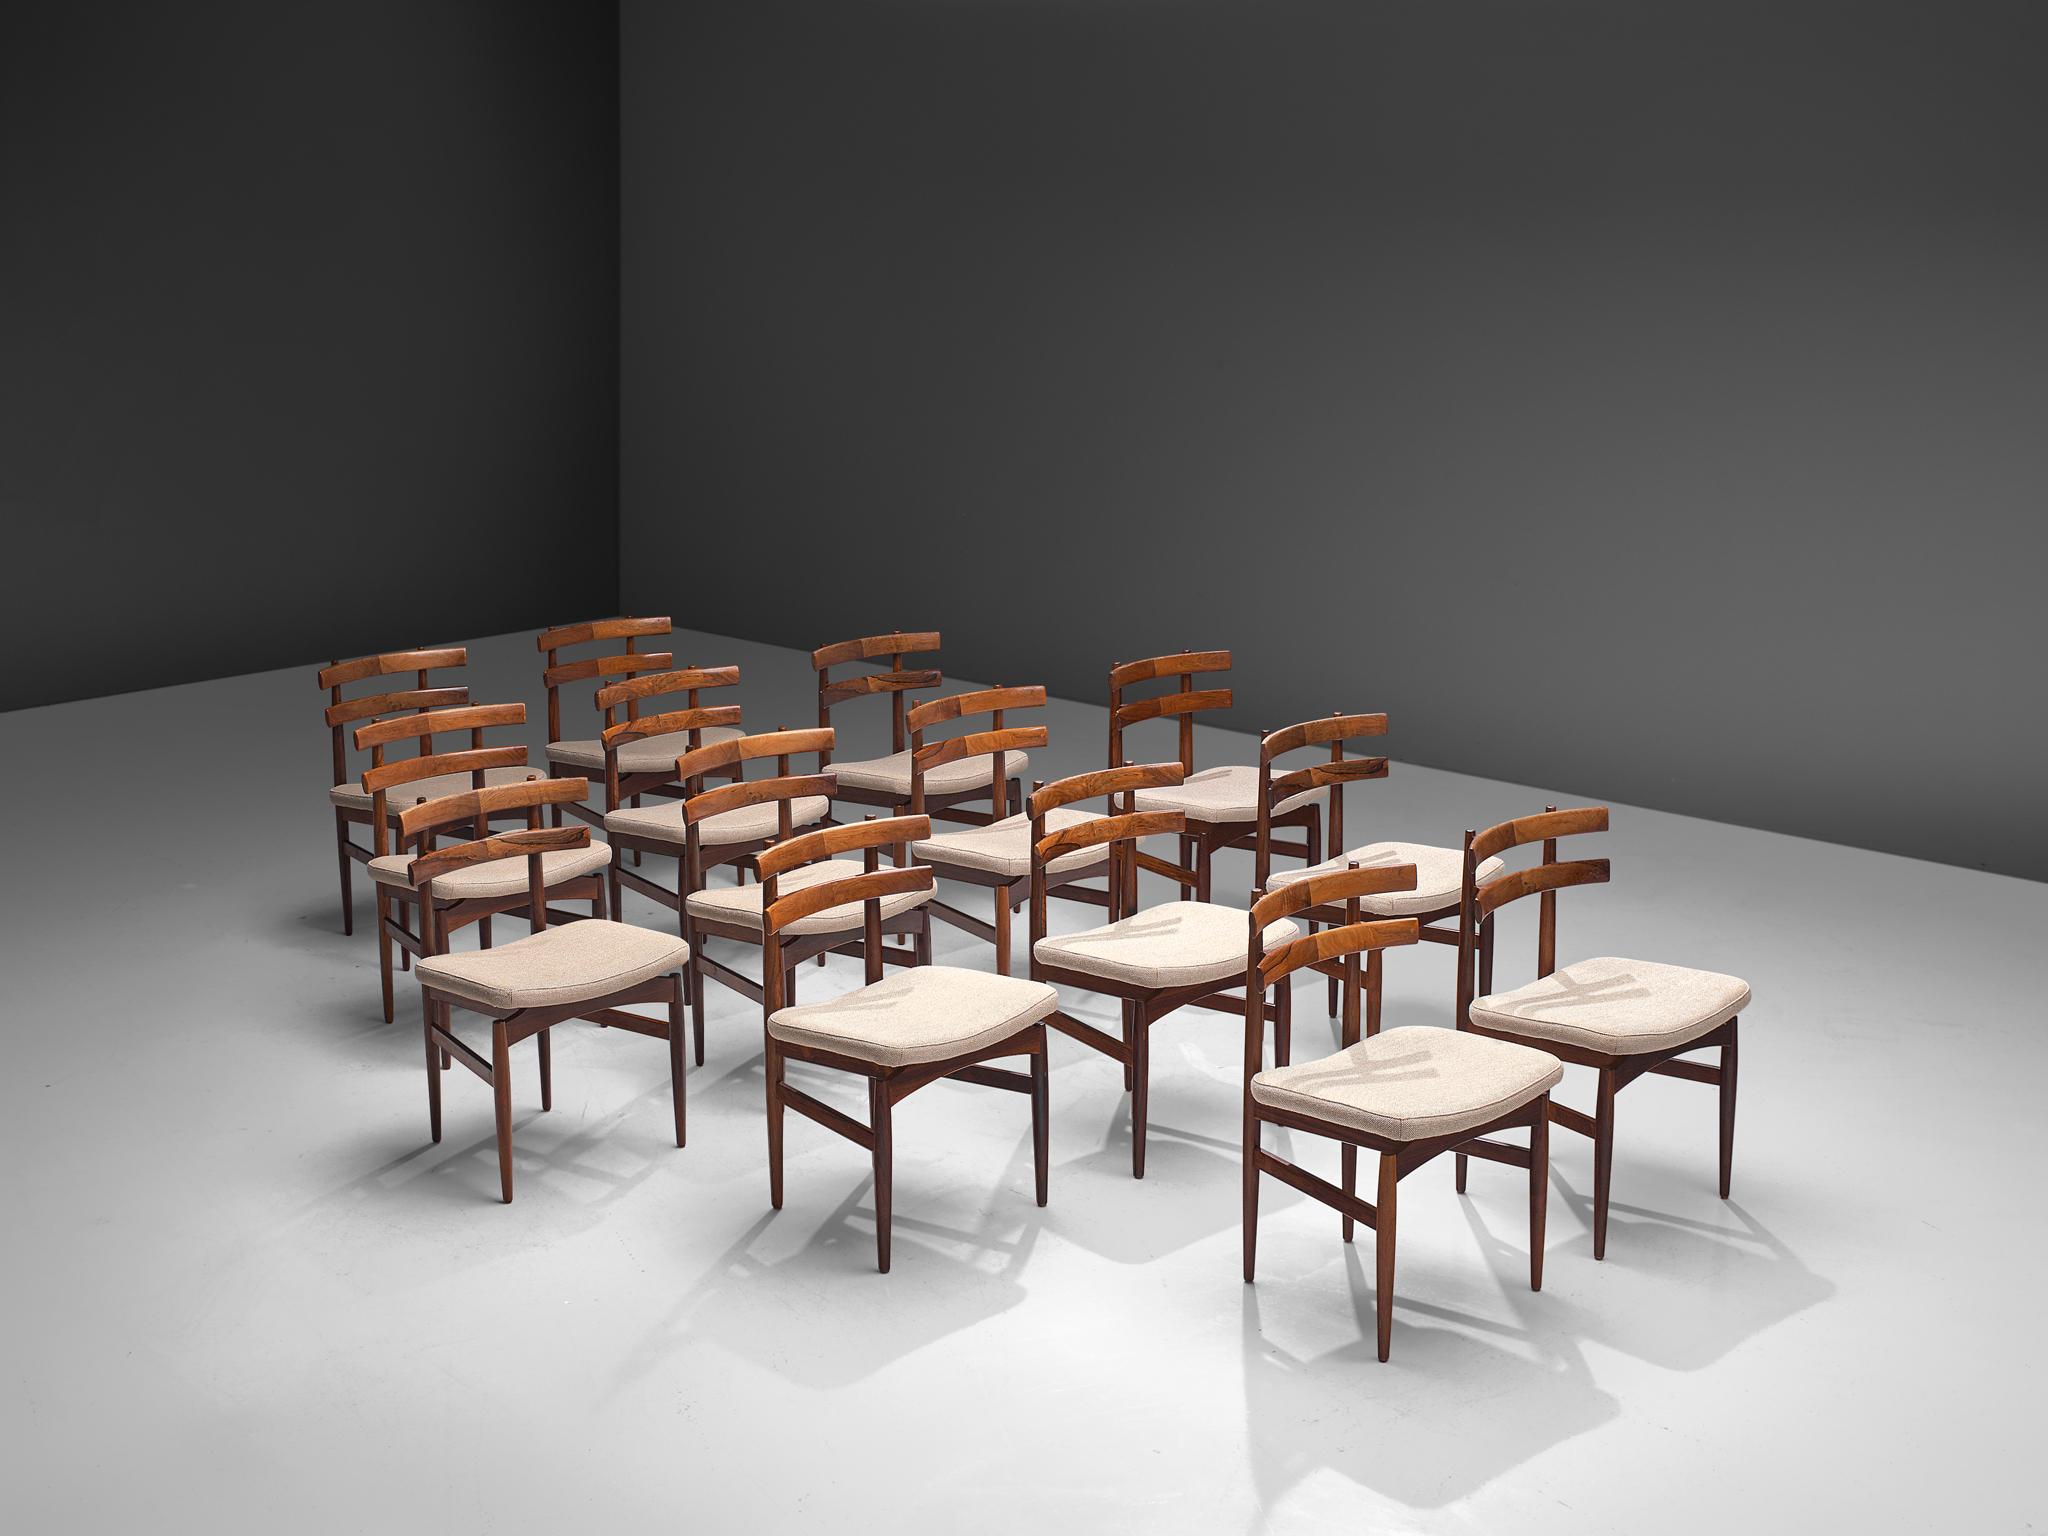 Poul Hundevad, large set of fourteen chairs model 30, rosewood and fabric, Denmark, 1960s.

Set of fourteen rare dining room chairs in rosewood and light fabric designed by Poul Hundevad. These chairs have a beautiful design, characteristic as